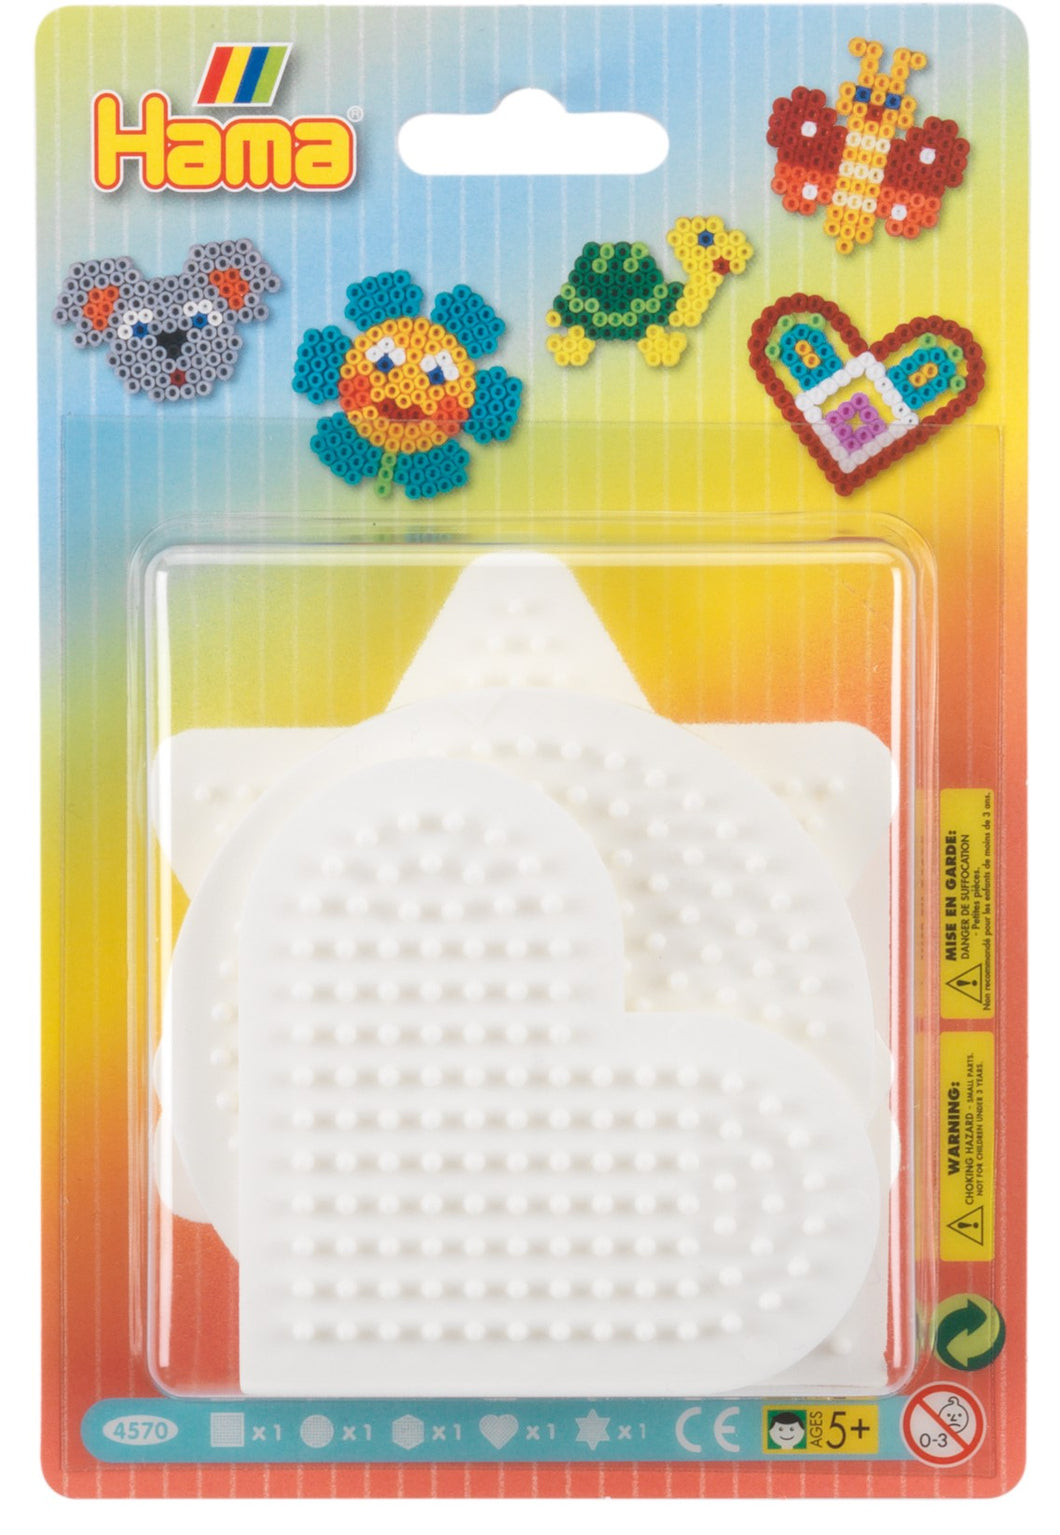 1 lot Square Round Star Heart Perler Hama Beads Peg Board Pegboard for  2.6mm.G5 